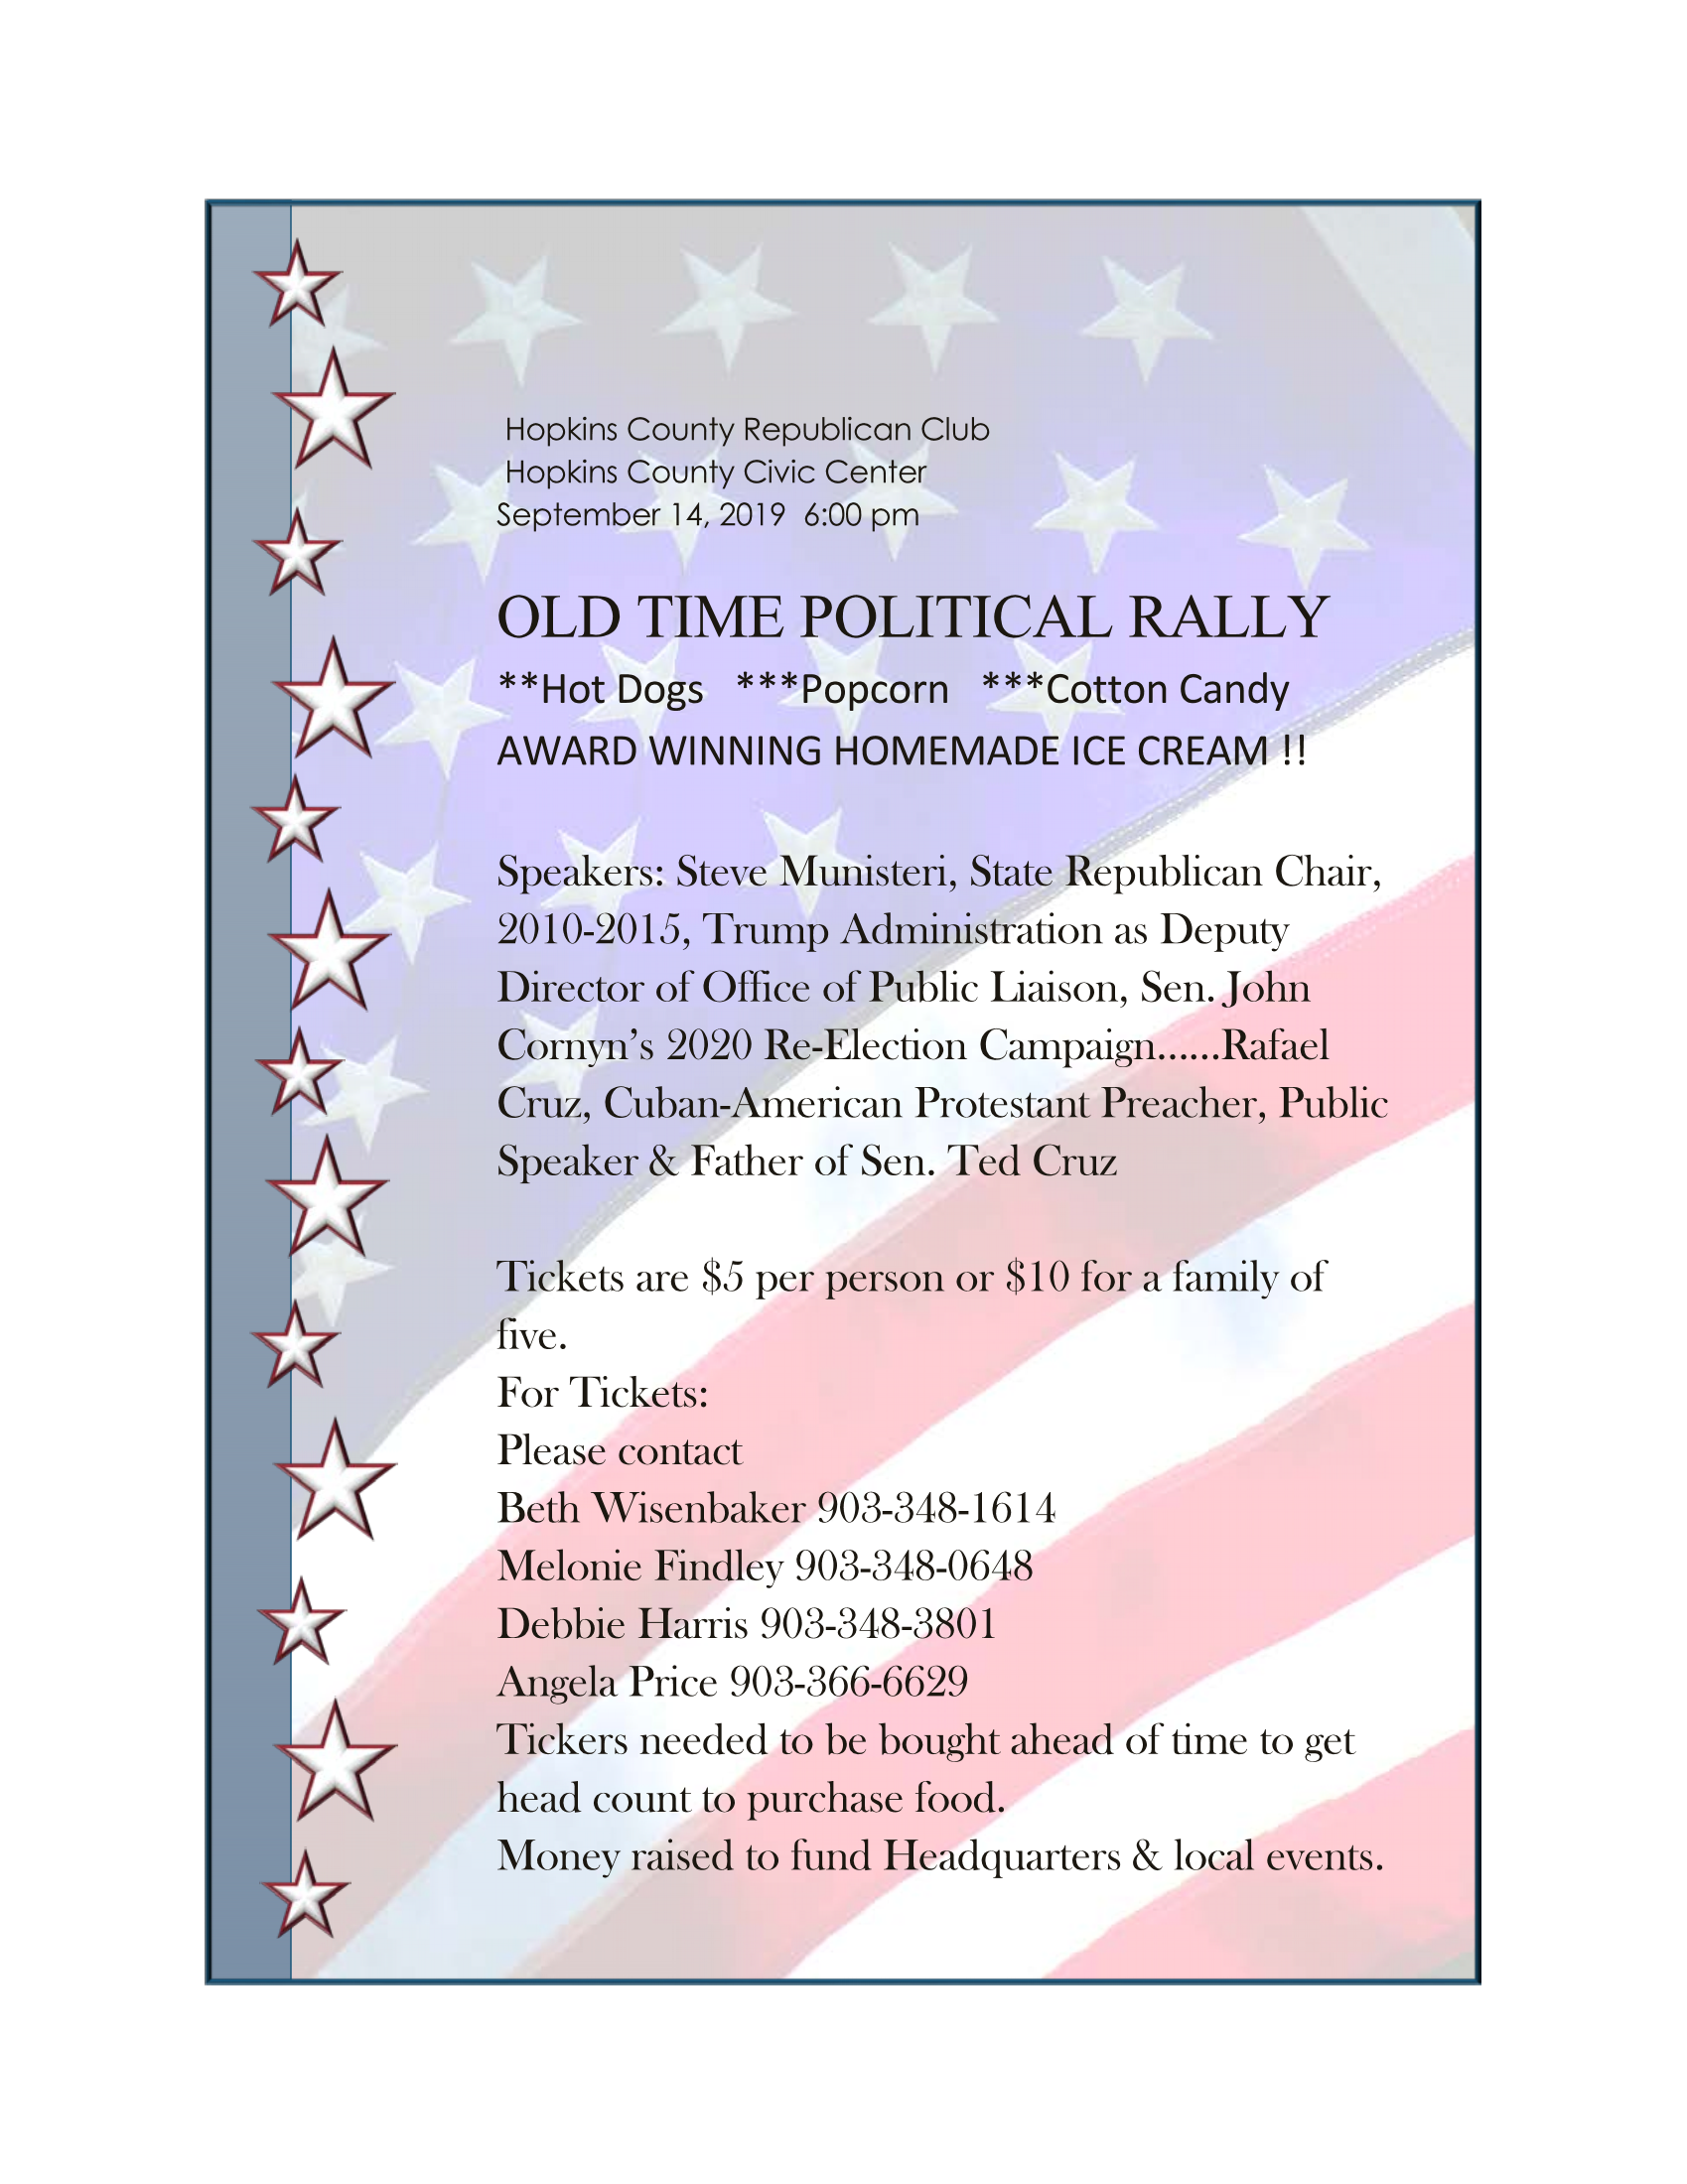 Hopkins County Republican Club Holding ‘Old Time Political Rally’ on September 14th